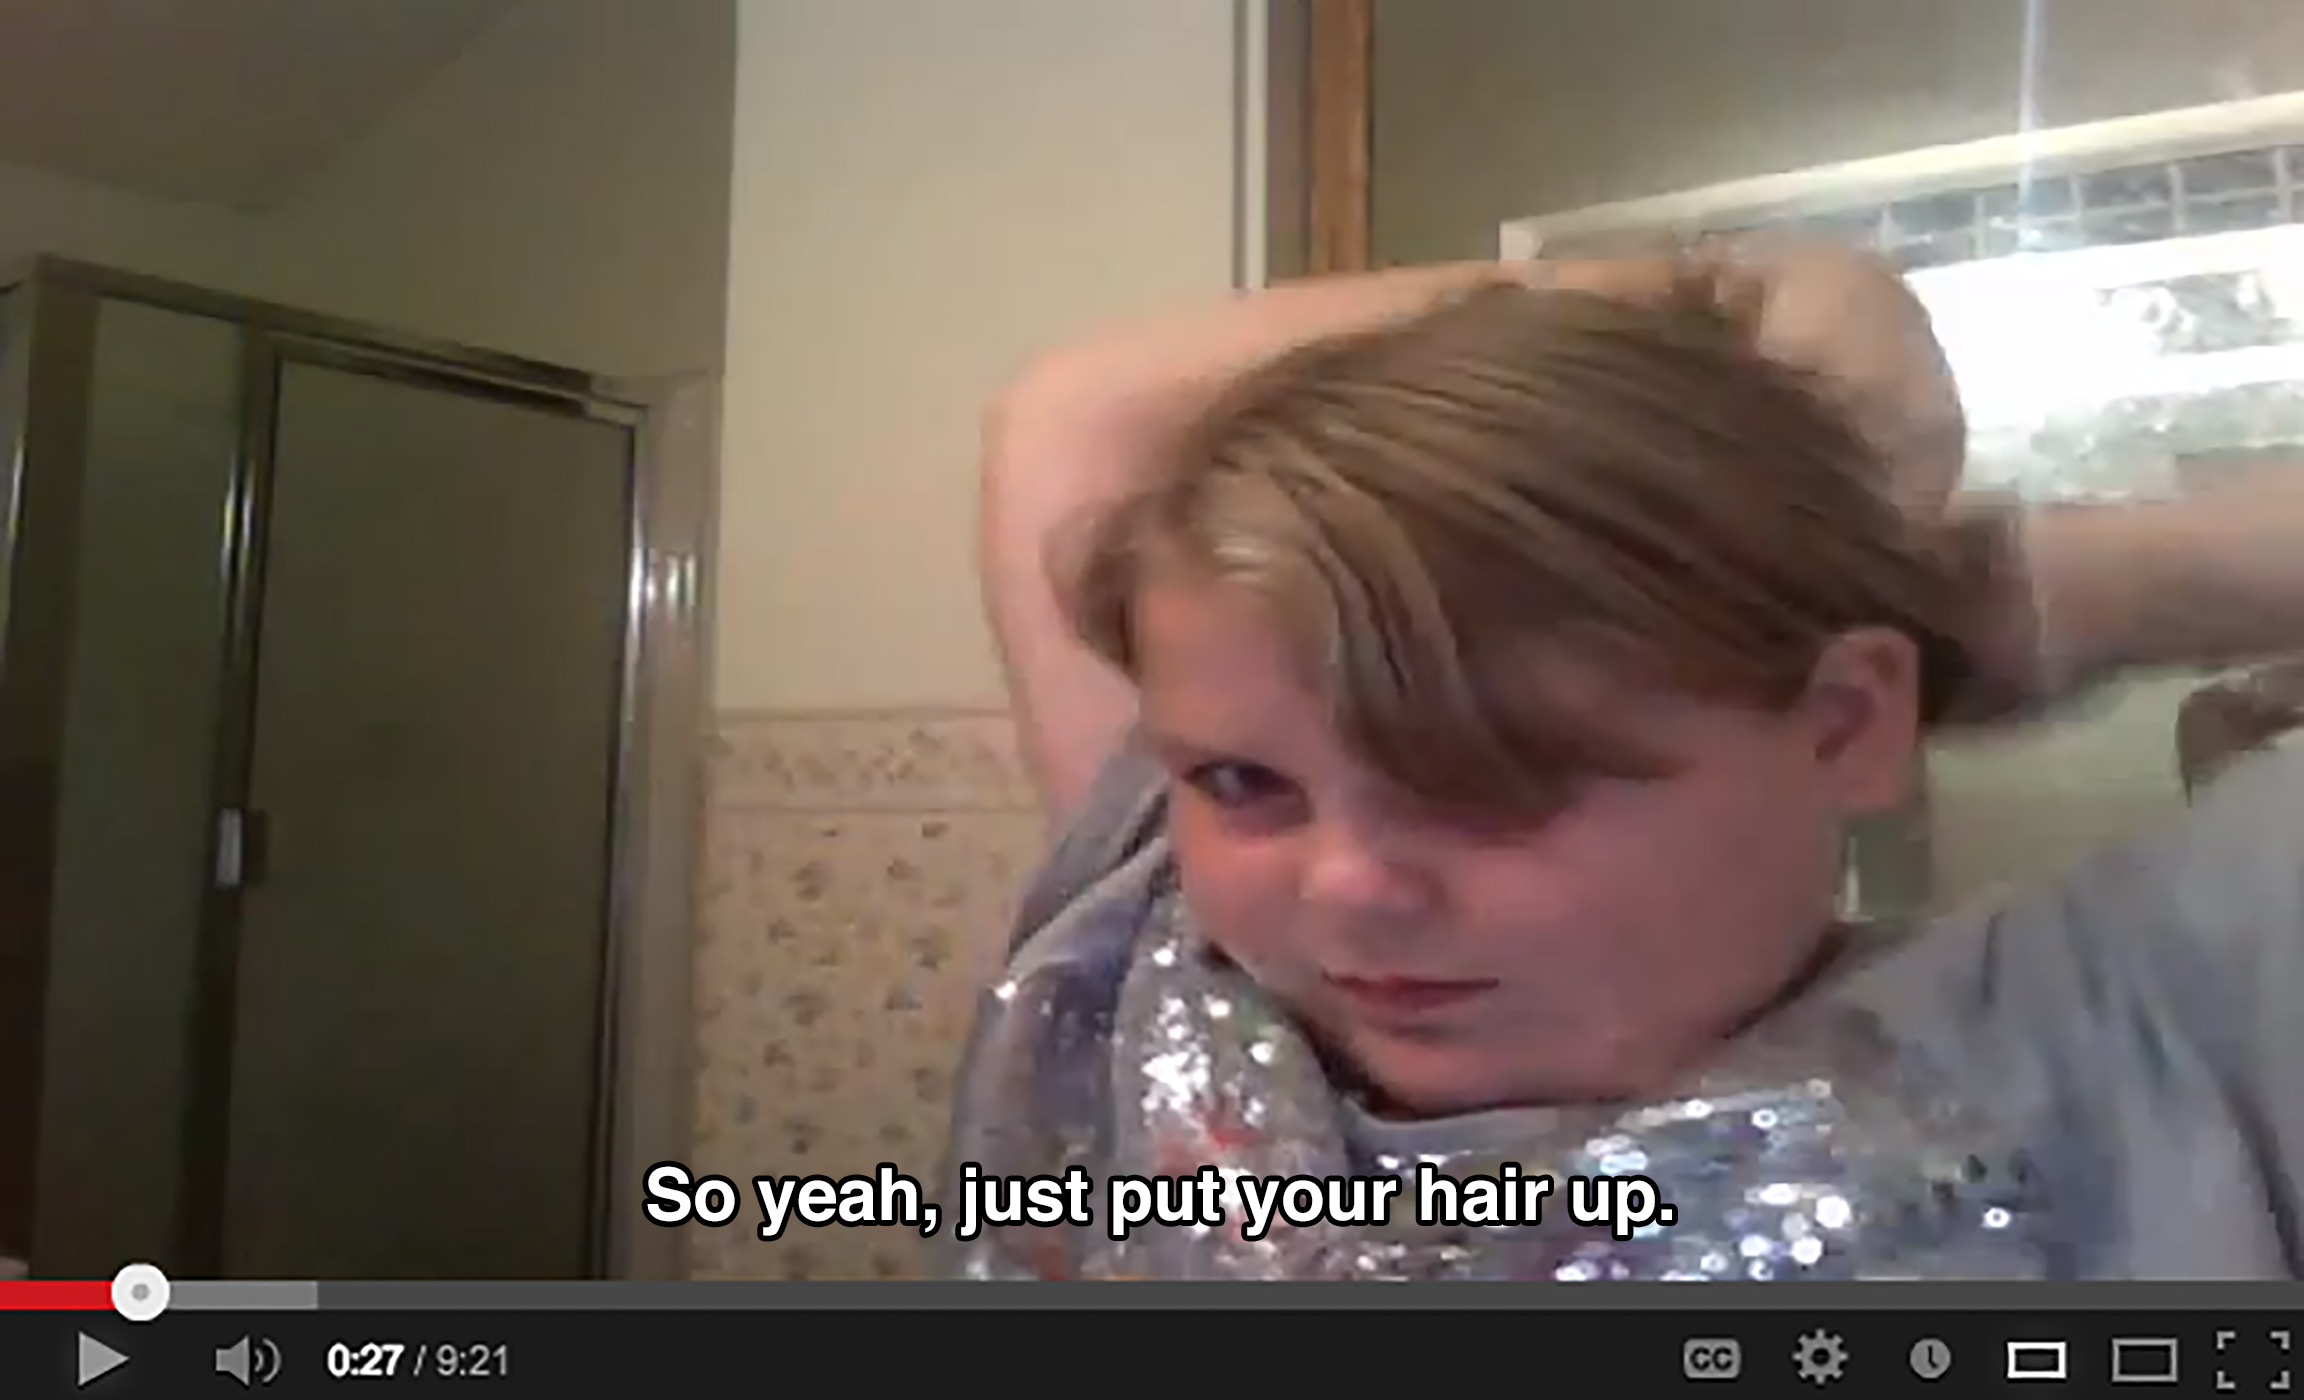 A young girl in a bathroom wrangles her hair while saying: So yeah, just put your hair up.